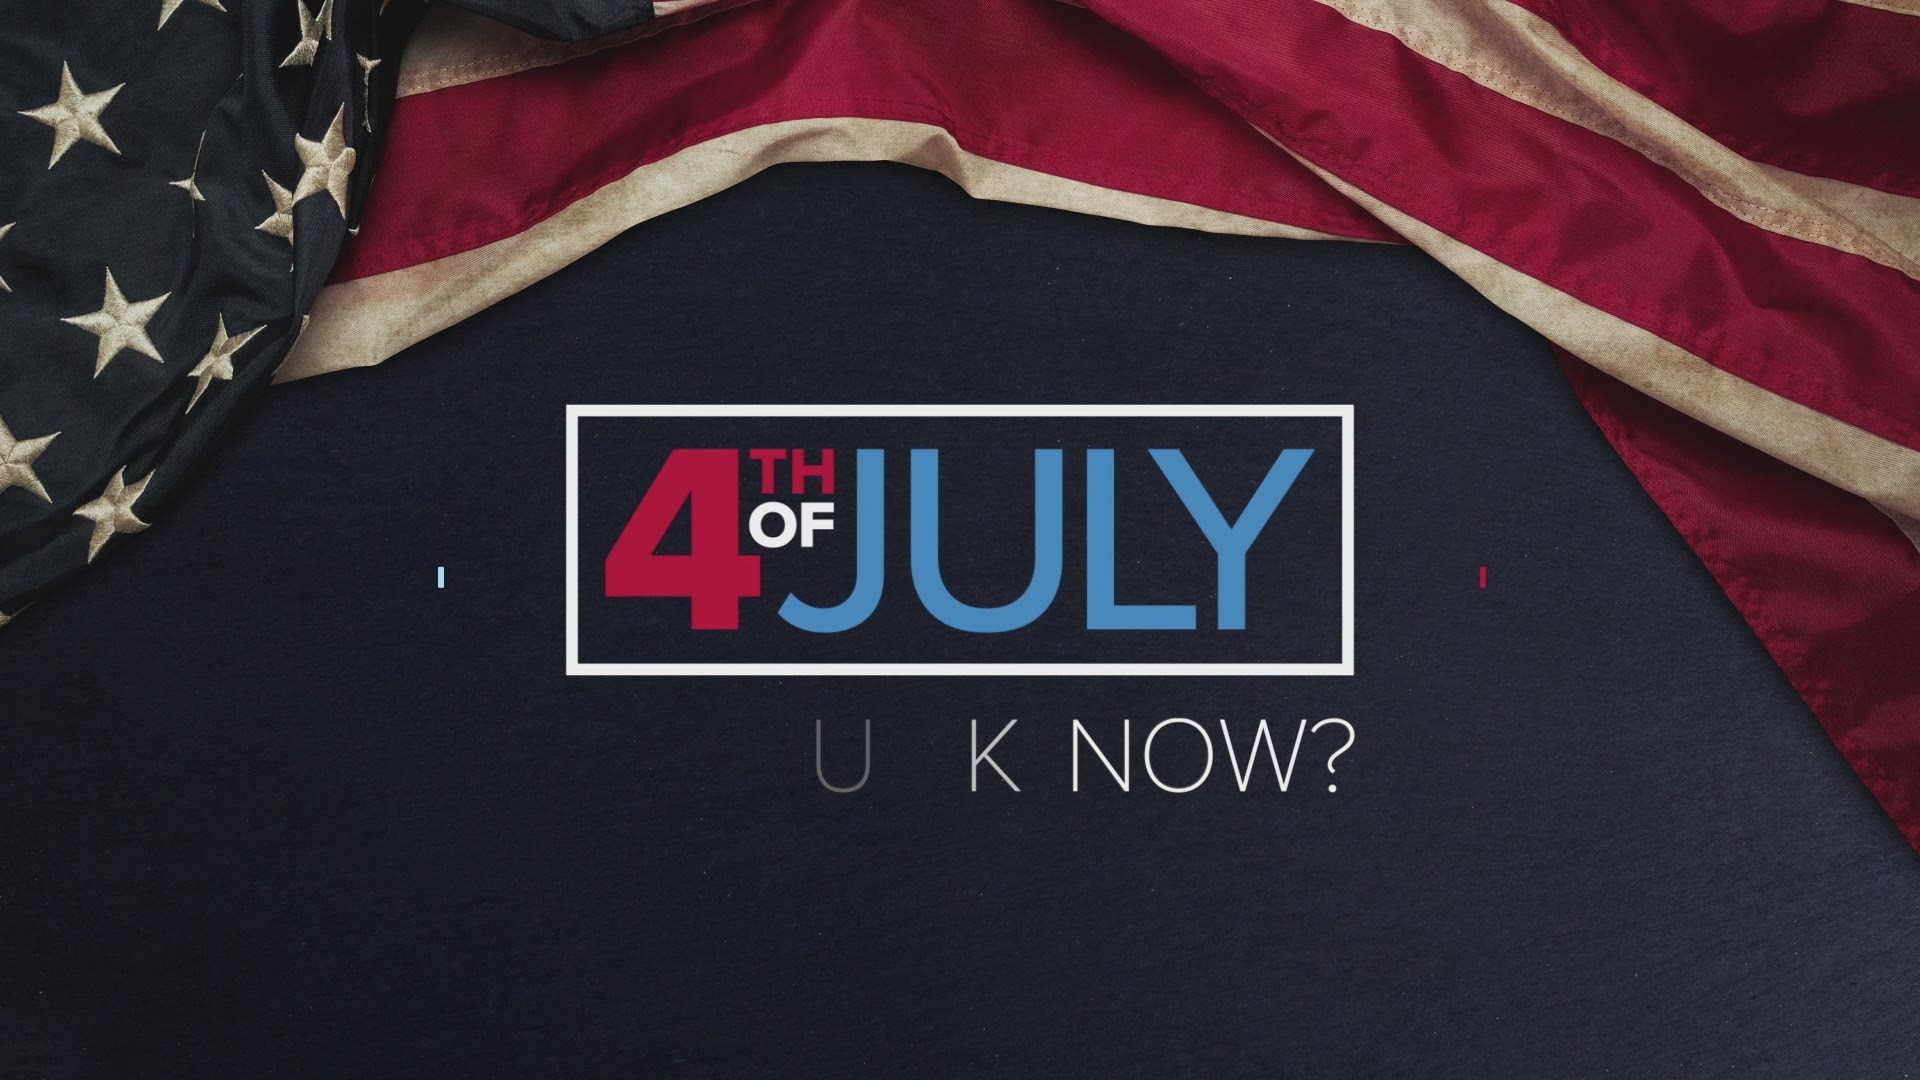 Fourth of July facts: did you know?